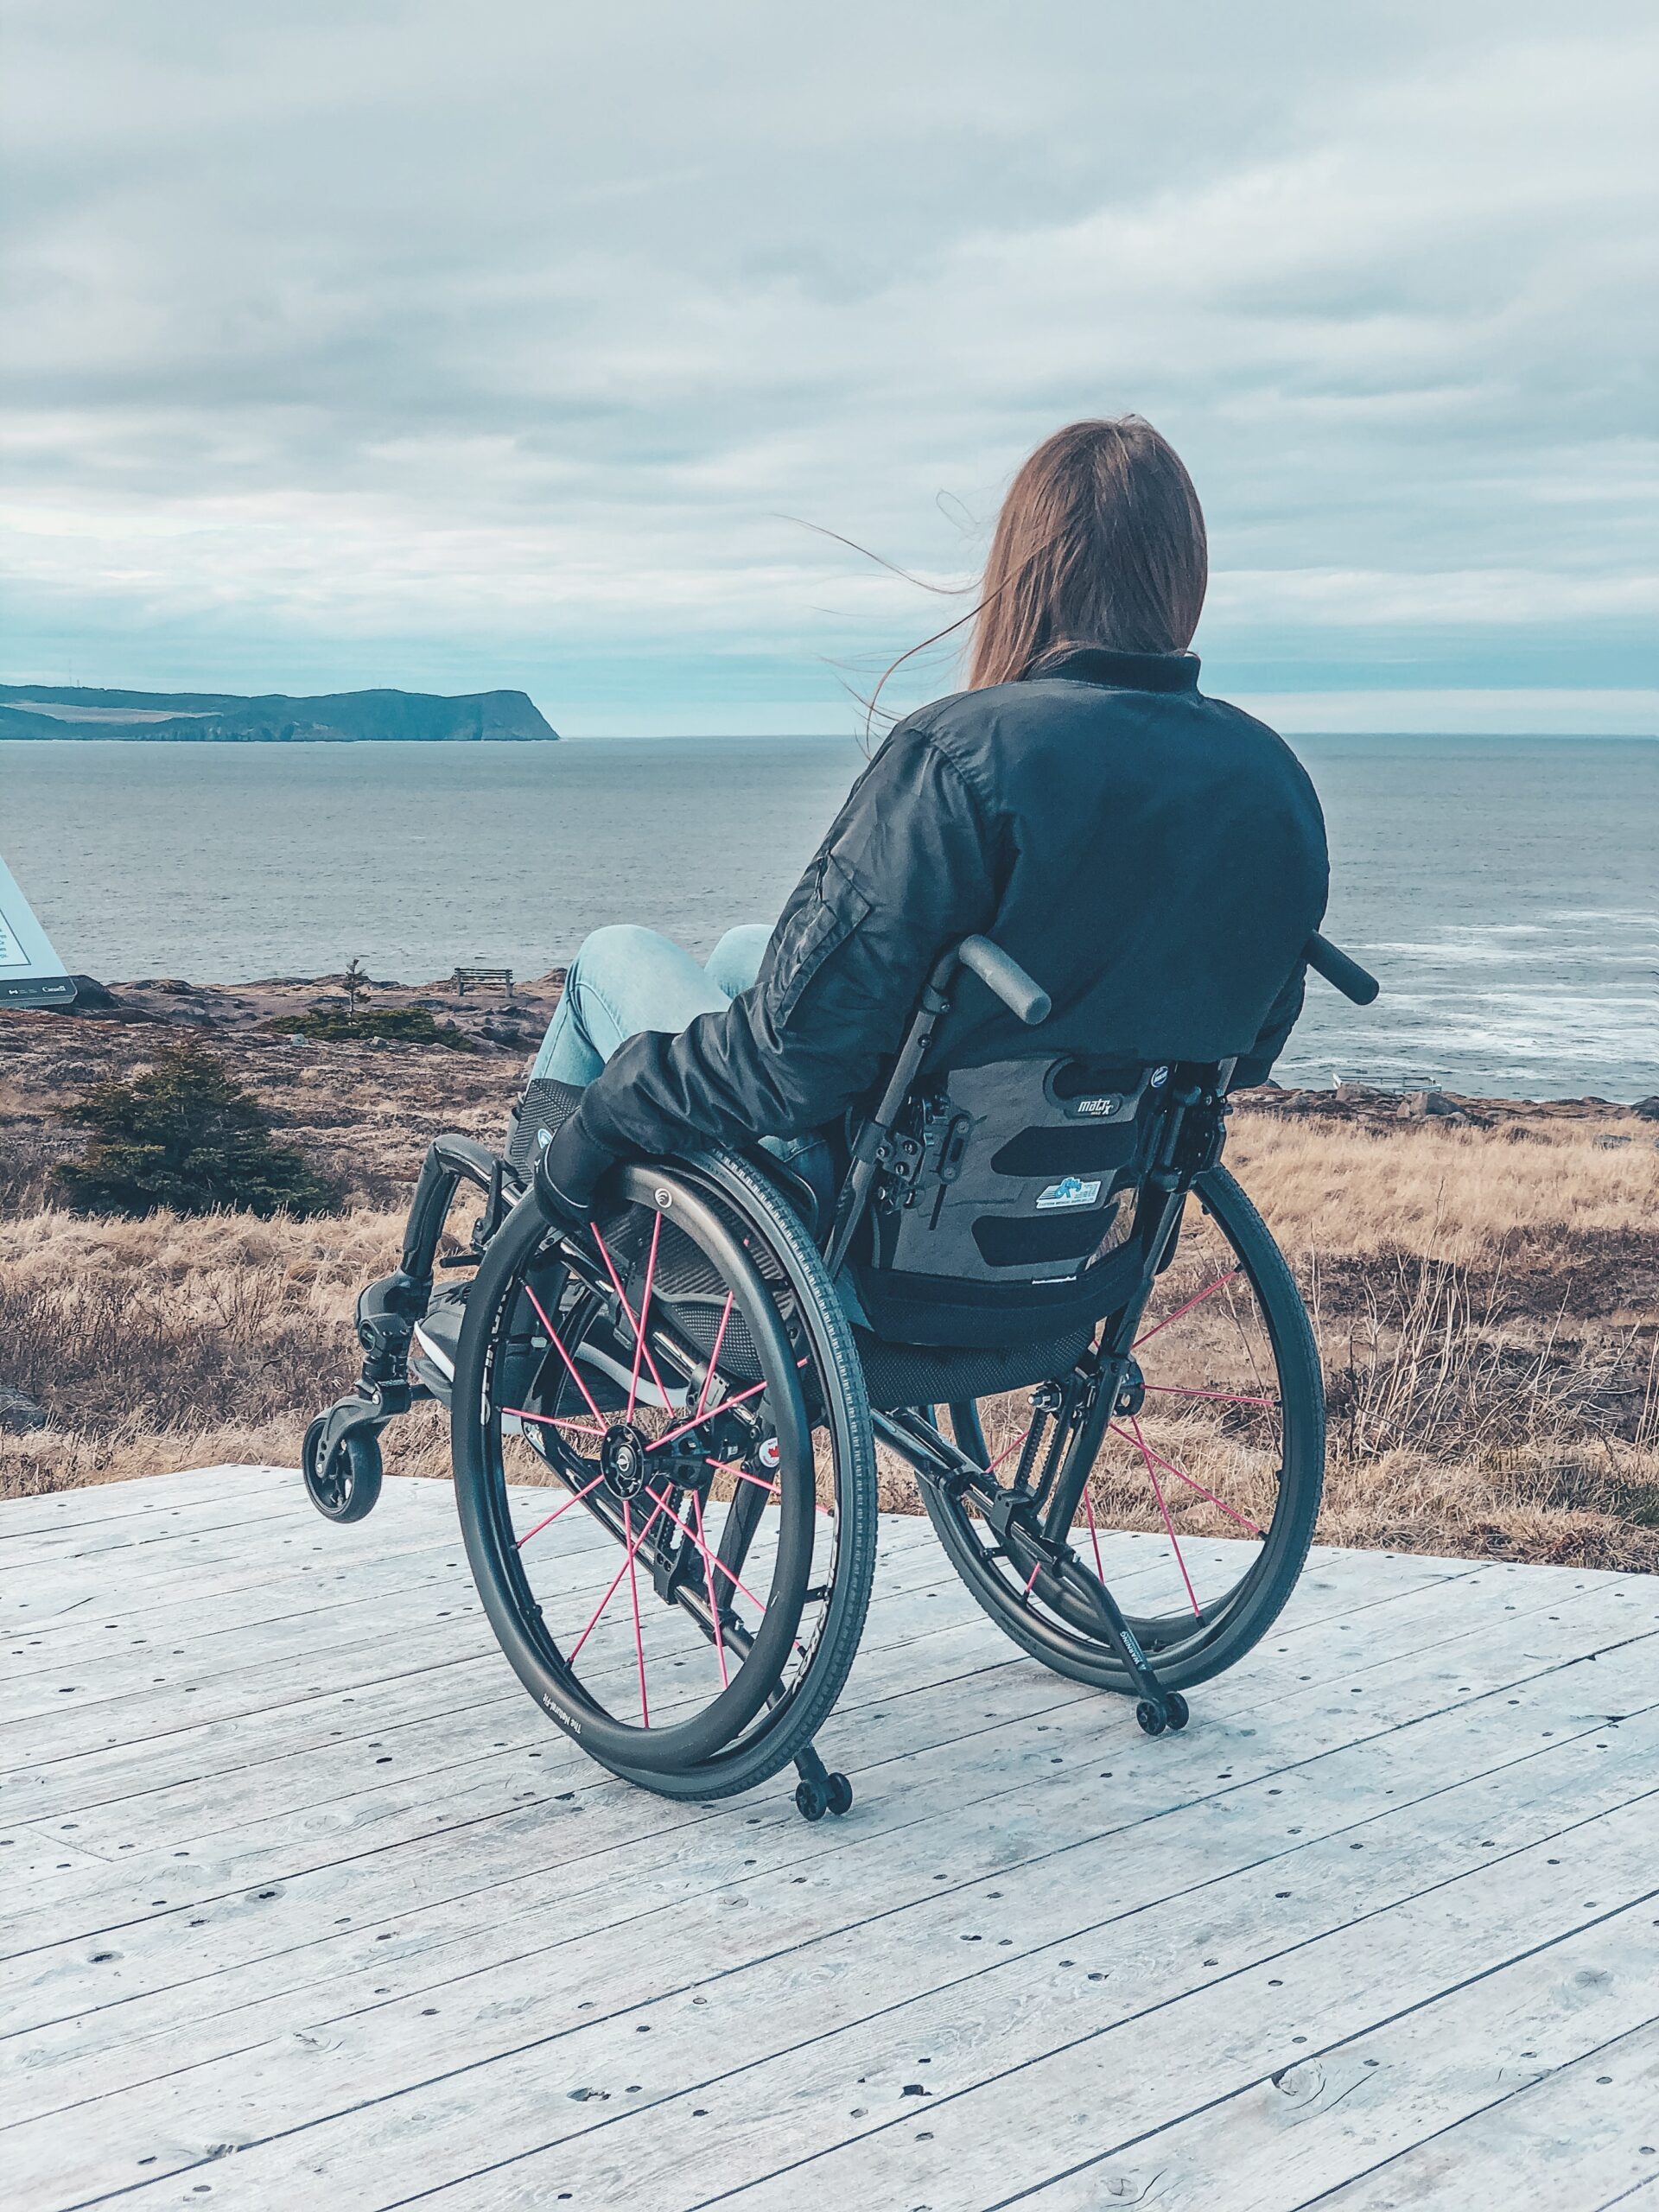 A photo of me from the back, sitting in my wheelchair looking out at the rocks and ocean from a wooden observation deck at Cape Spear. Photo credit: Matt McCoag